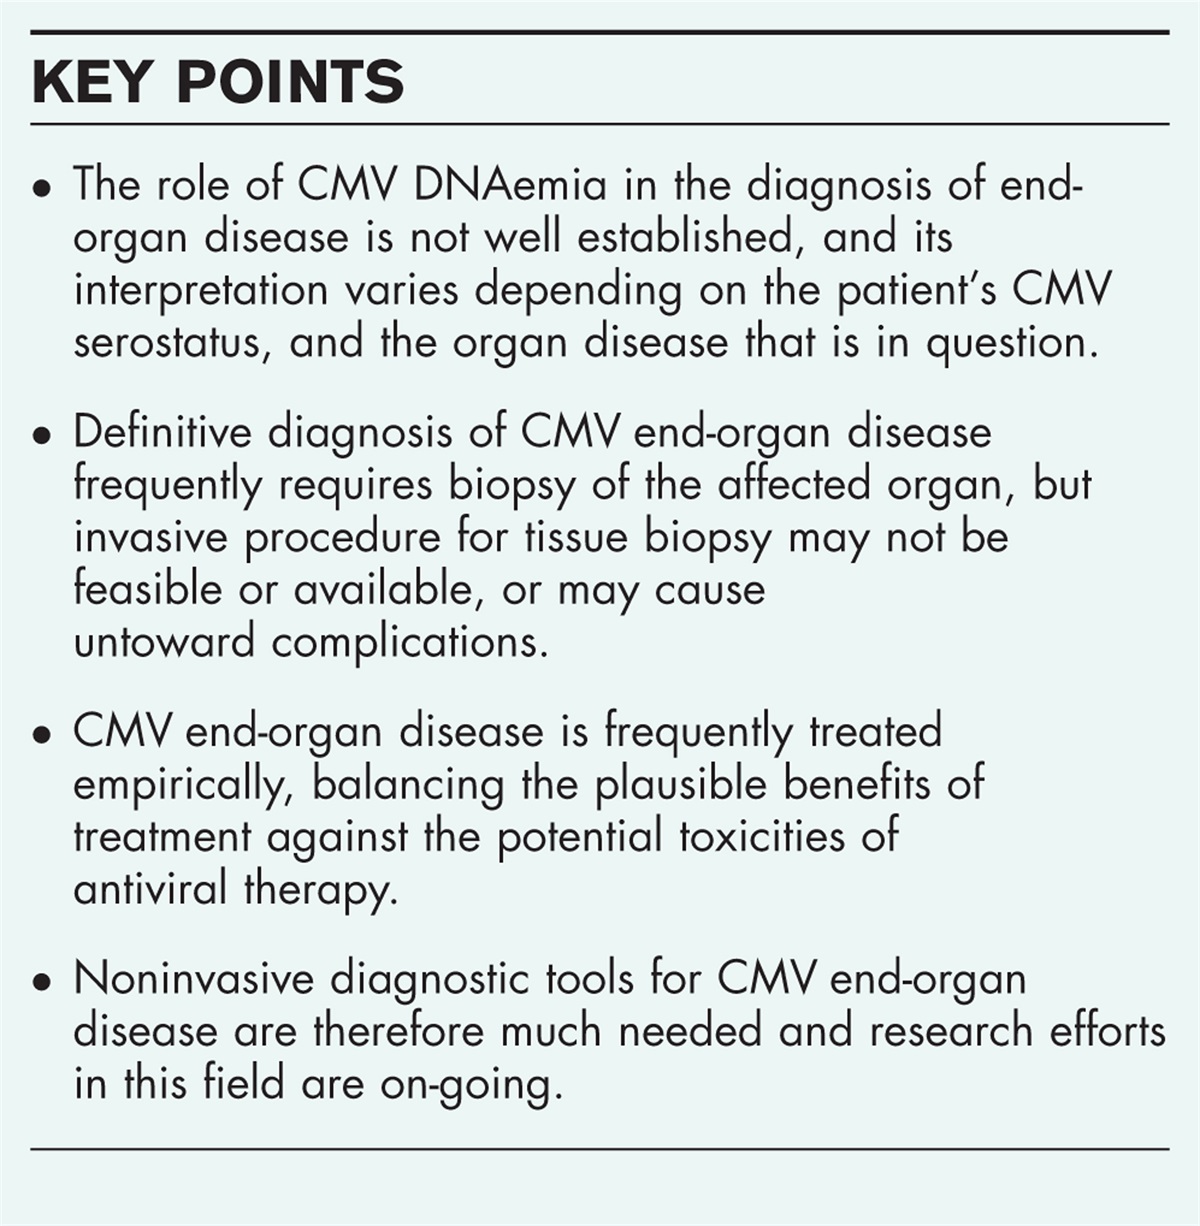 Human cytomegalovirus: a survey of end-organ diseases and diagnostic challenges in solid organ transplant recipients